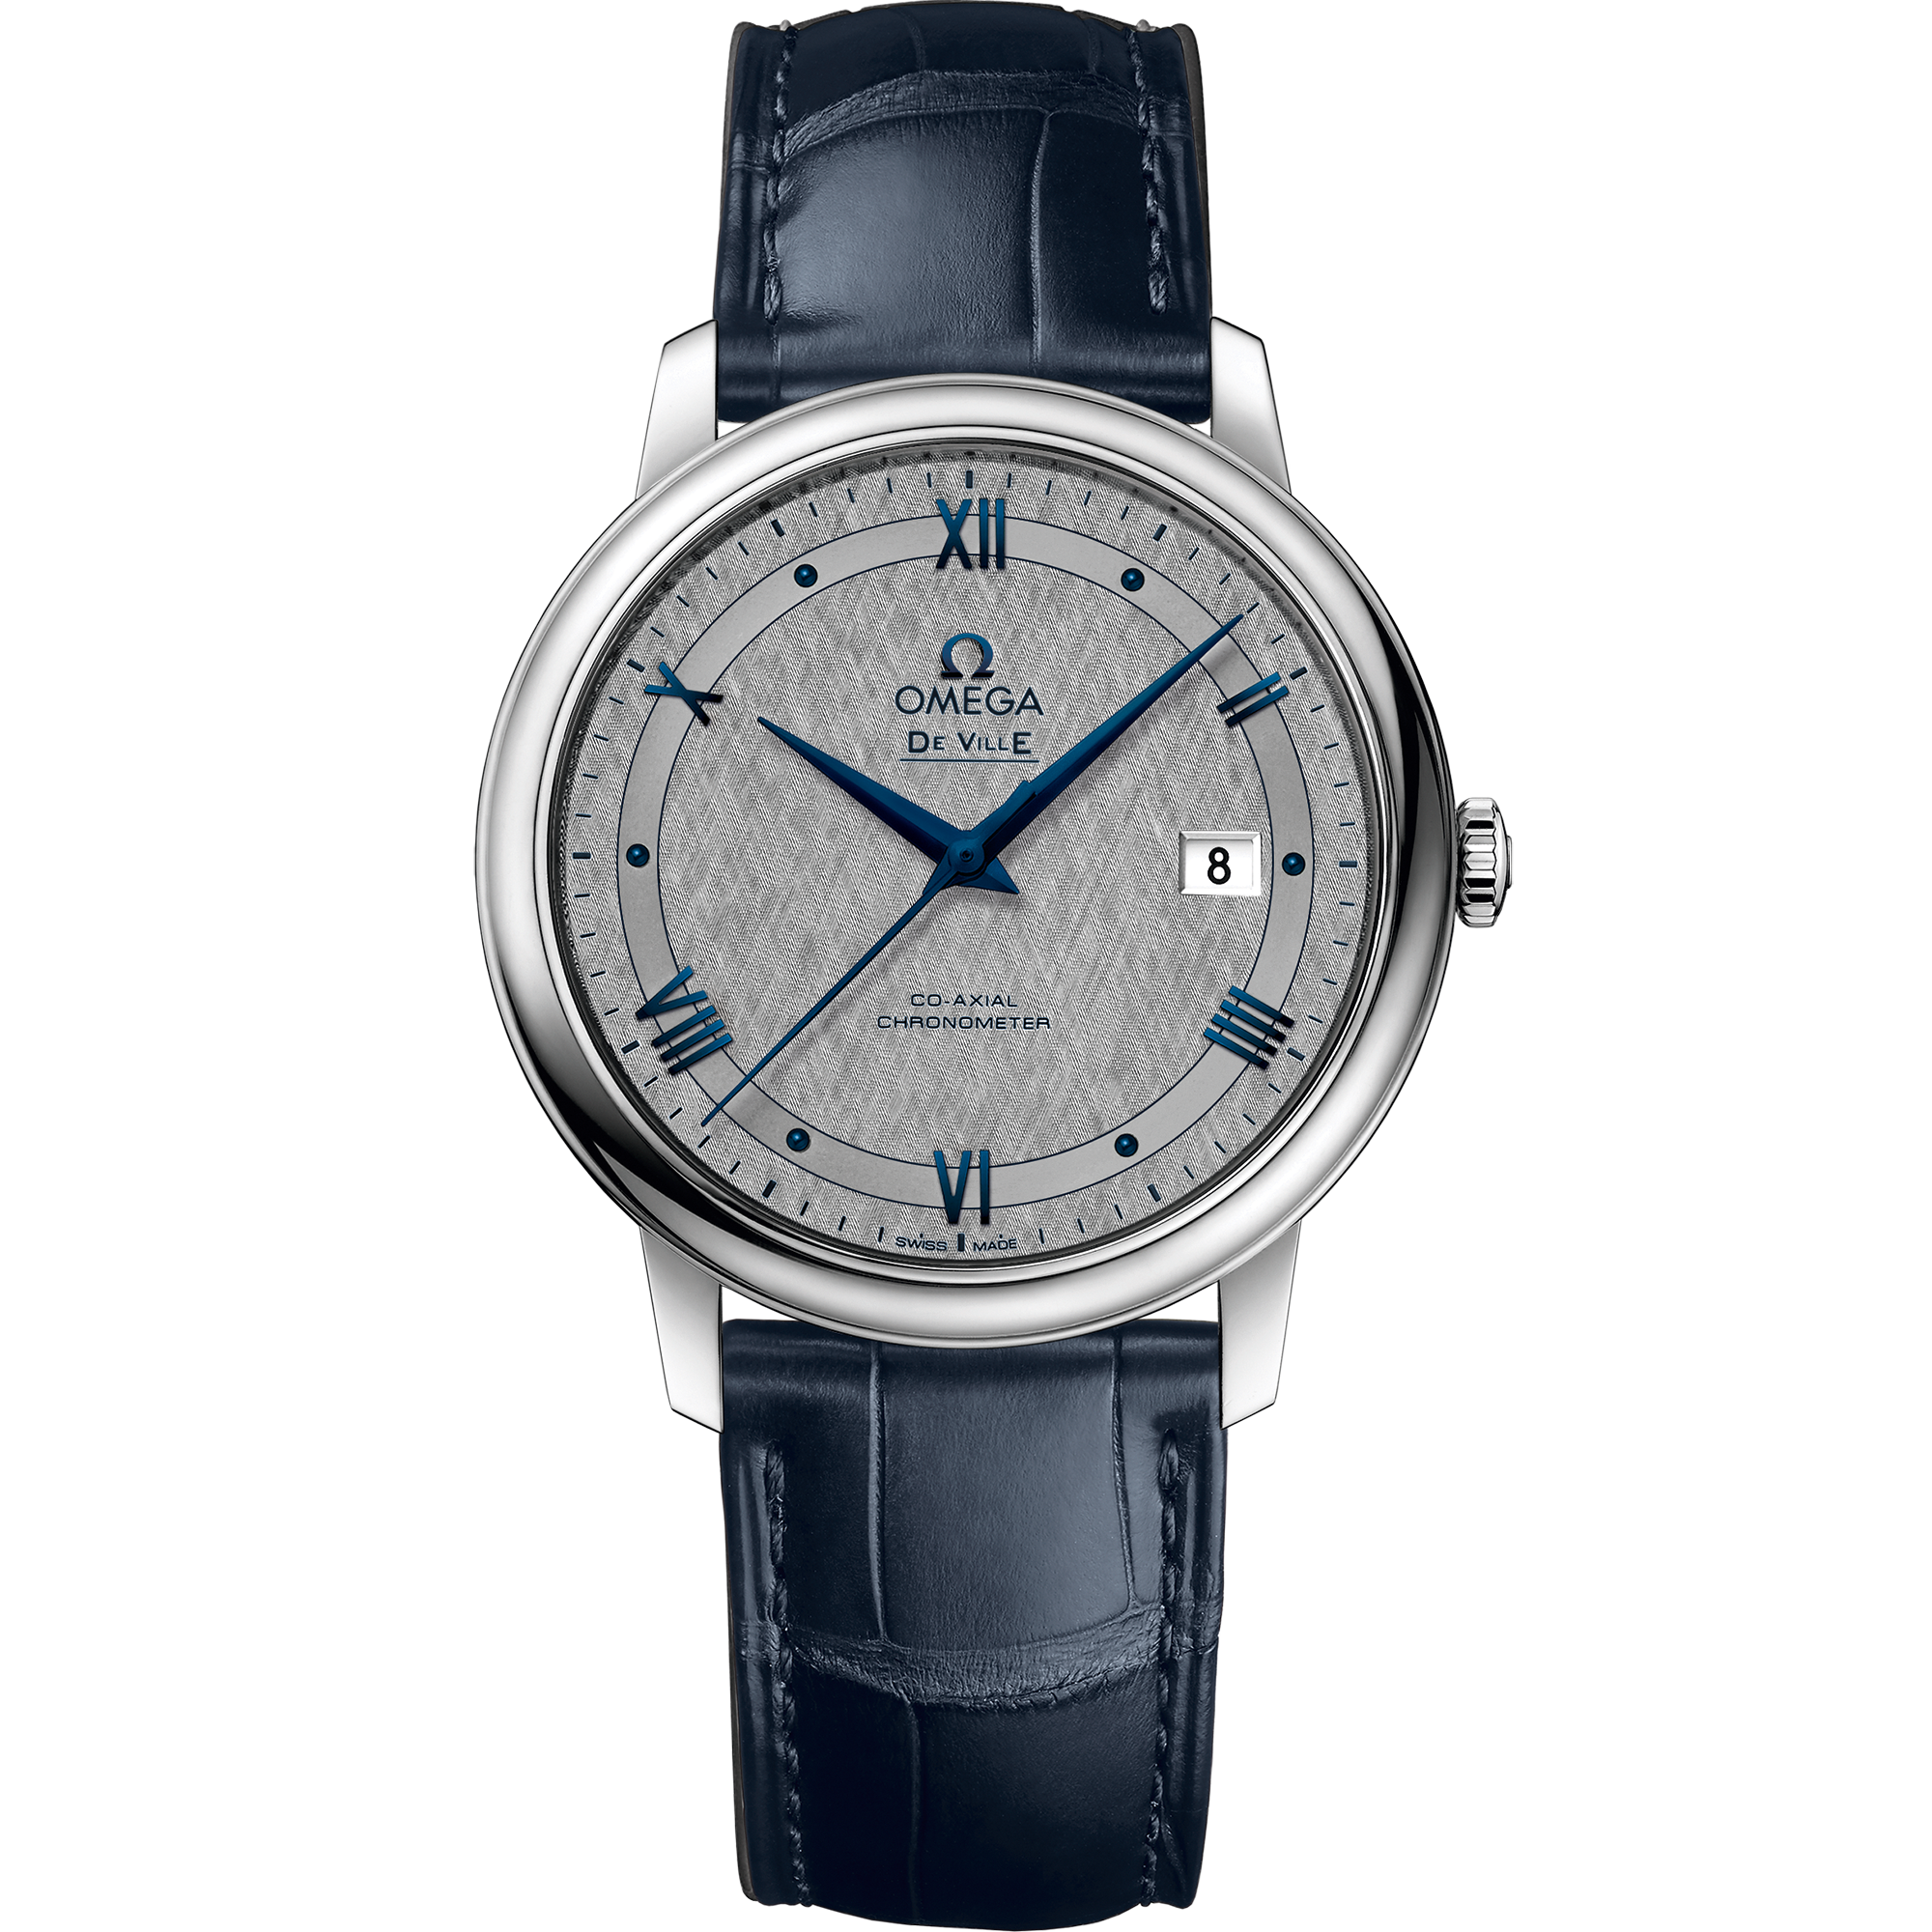  dial watch on Steel case with Leather strap - De Ville 39.5 mm, steel on leather strap - 424.13.40.20.06.002